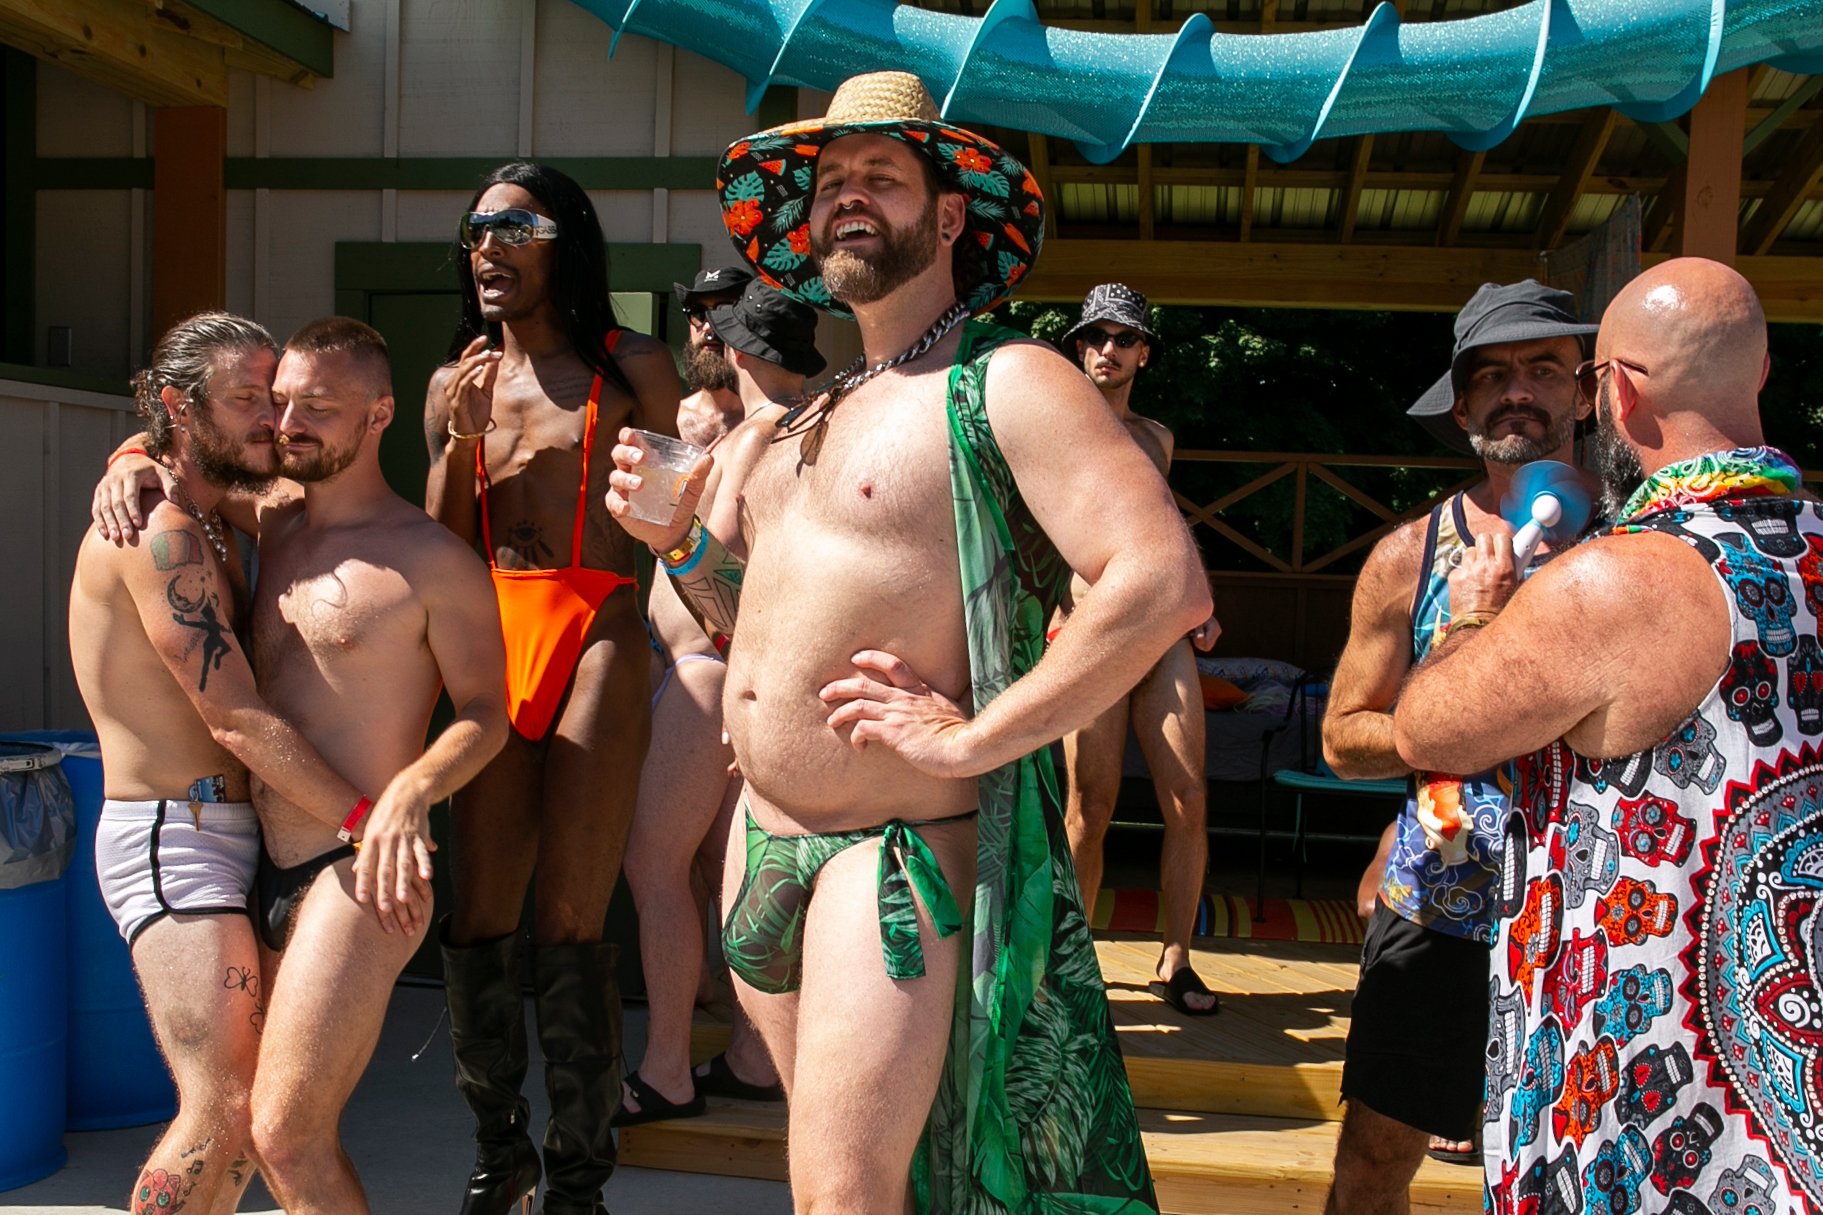  Saugatuck, a town on Michigan’s western coast, is Chicago’s answer to Fire Island. With multiple Gay Resorts located in the small town, it’s an international attraction for single and coupled LGBTQIA+ people.   Joe Gallagher, 37, of Chicago, center,